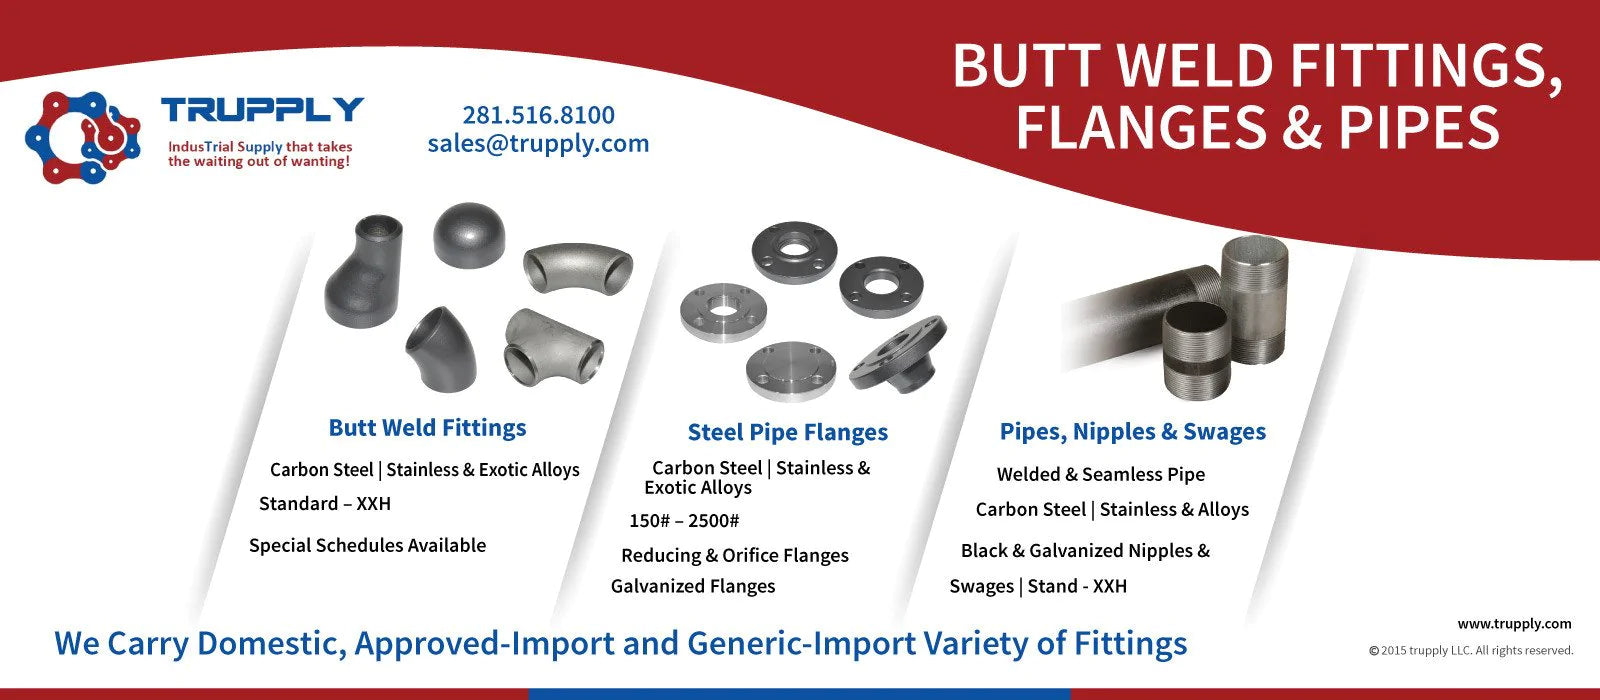 Butt Weld Fittings, Flanges & Pipes - Trupply